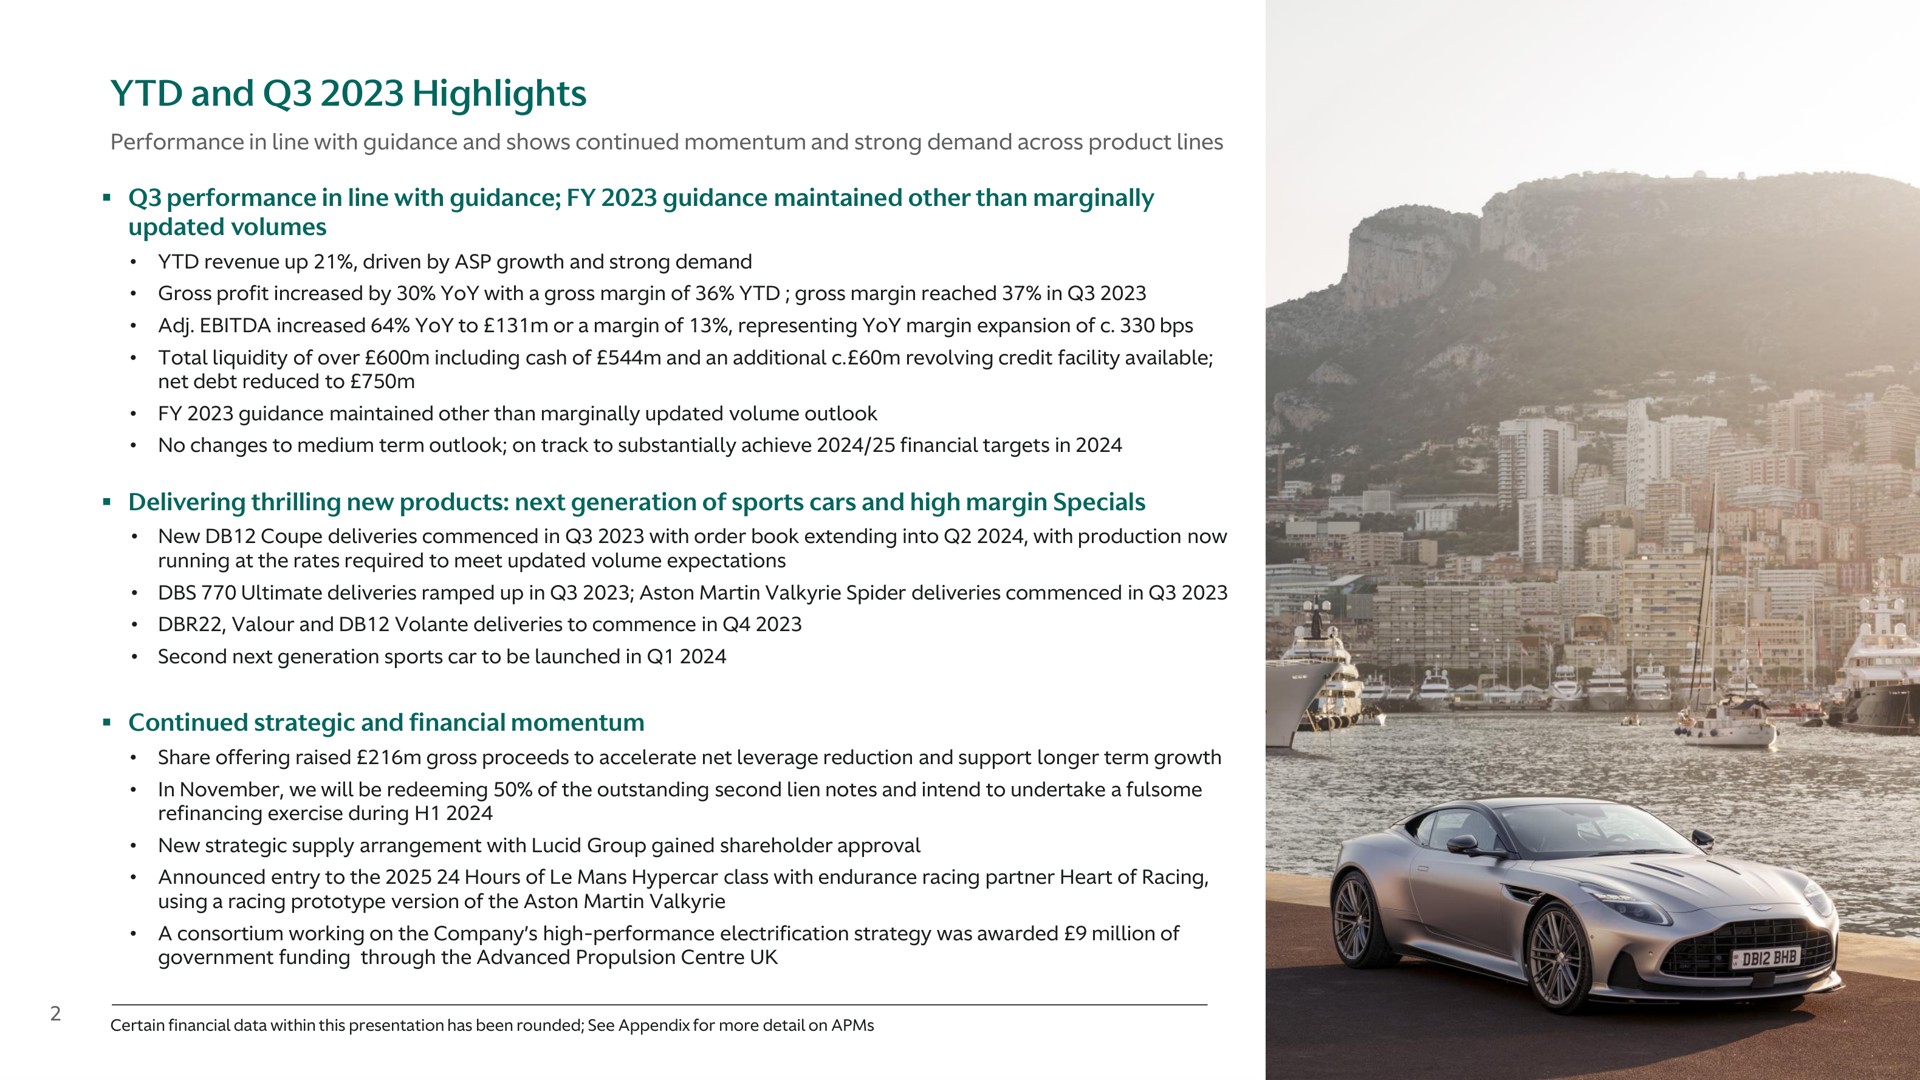 and highlights performance in line with guidance guidance maintained other than marginally updated volumes delivering thrilling new products next generation of sports cars and high margin specials continued strategic and financial momentum | Aston Martin Lagonda